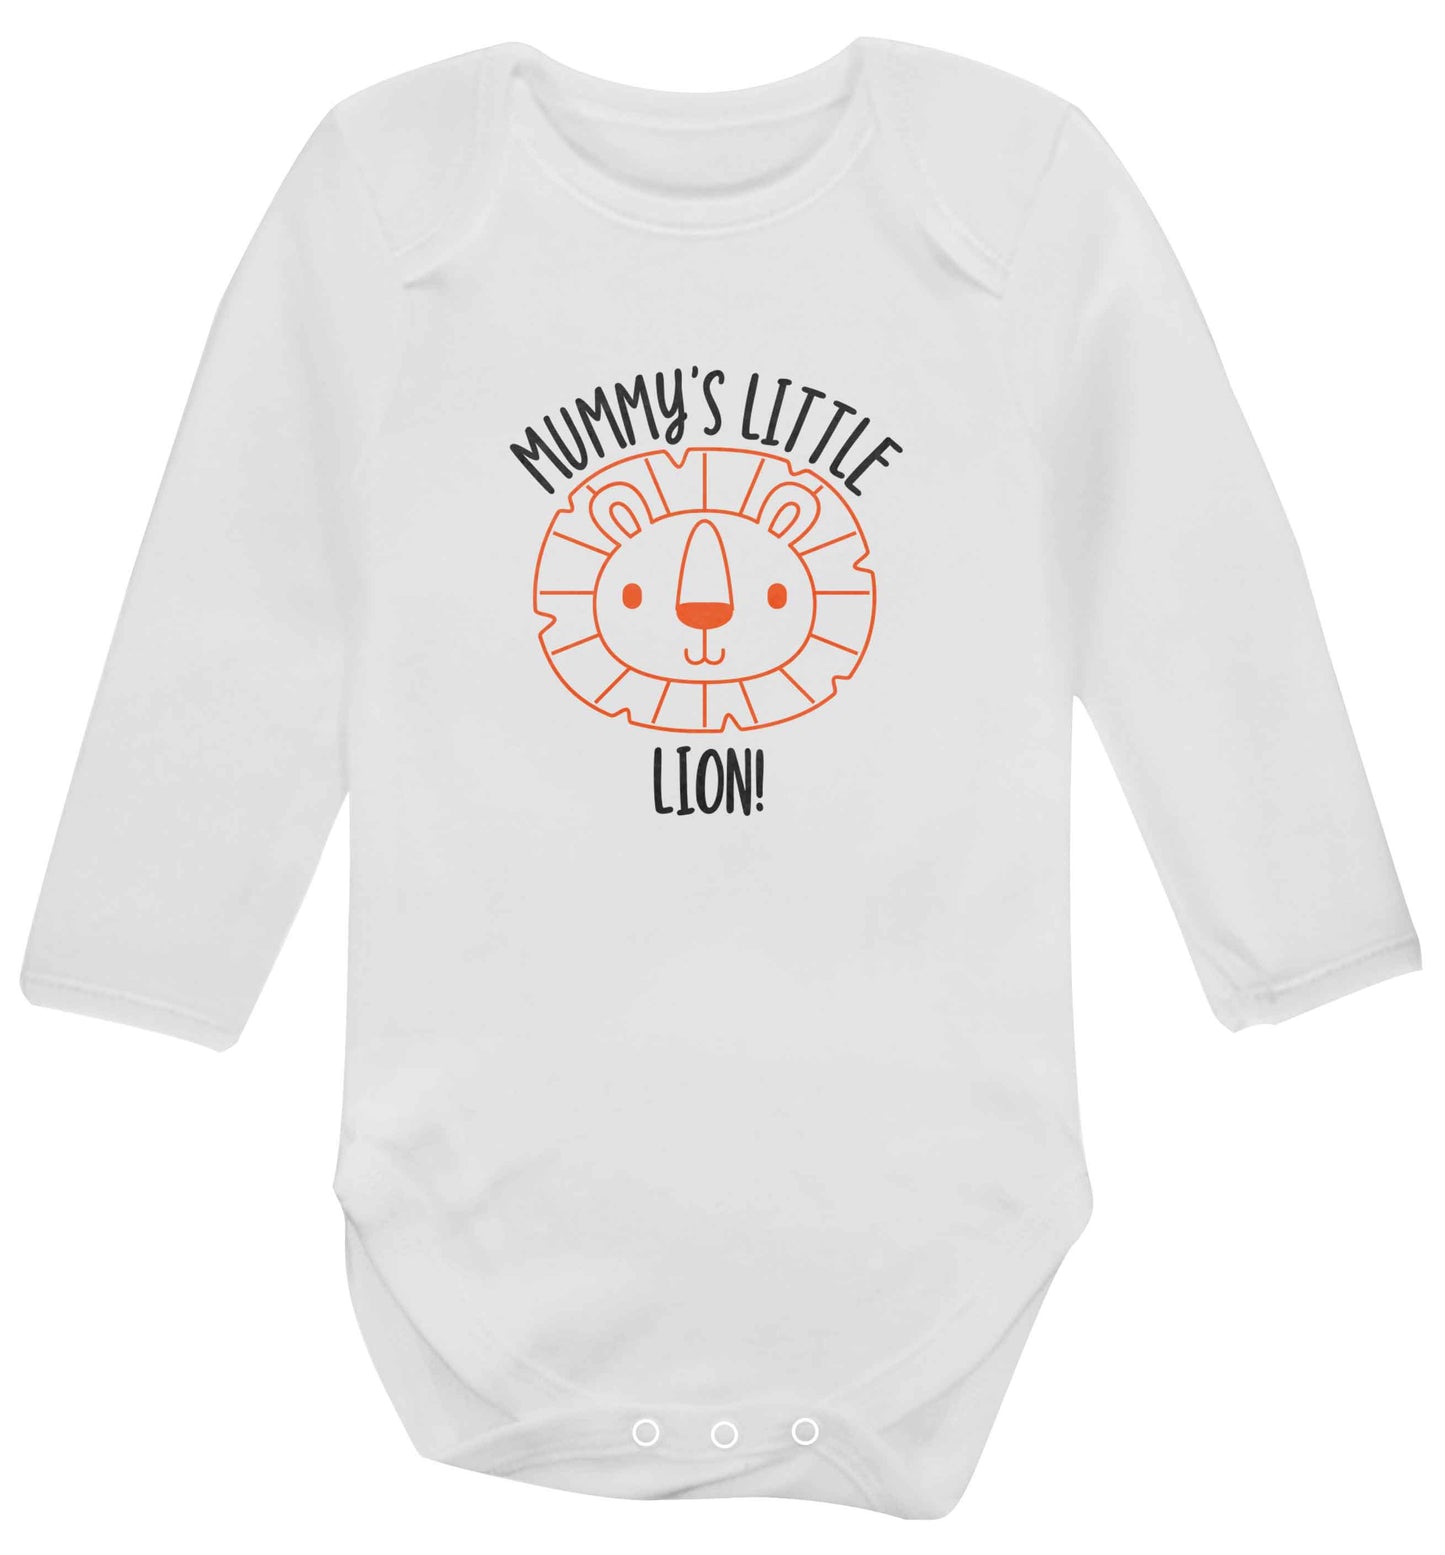 Mummy's little lion baby vest long sleeved white 6-12 months